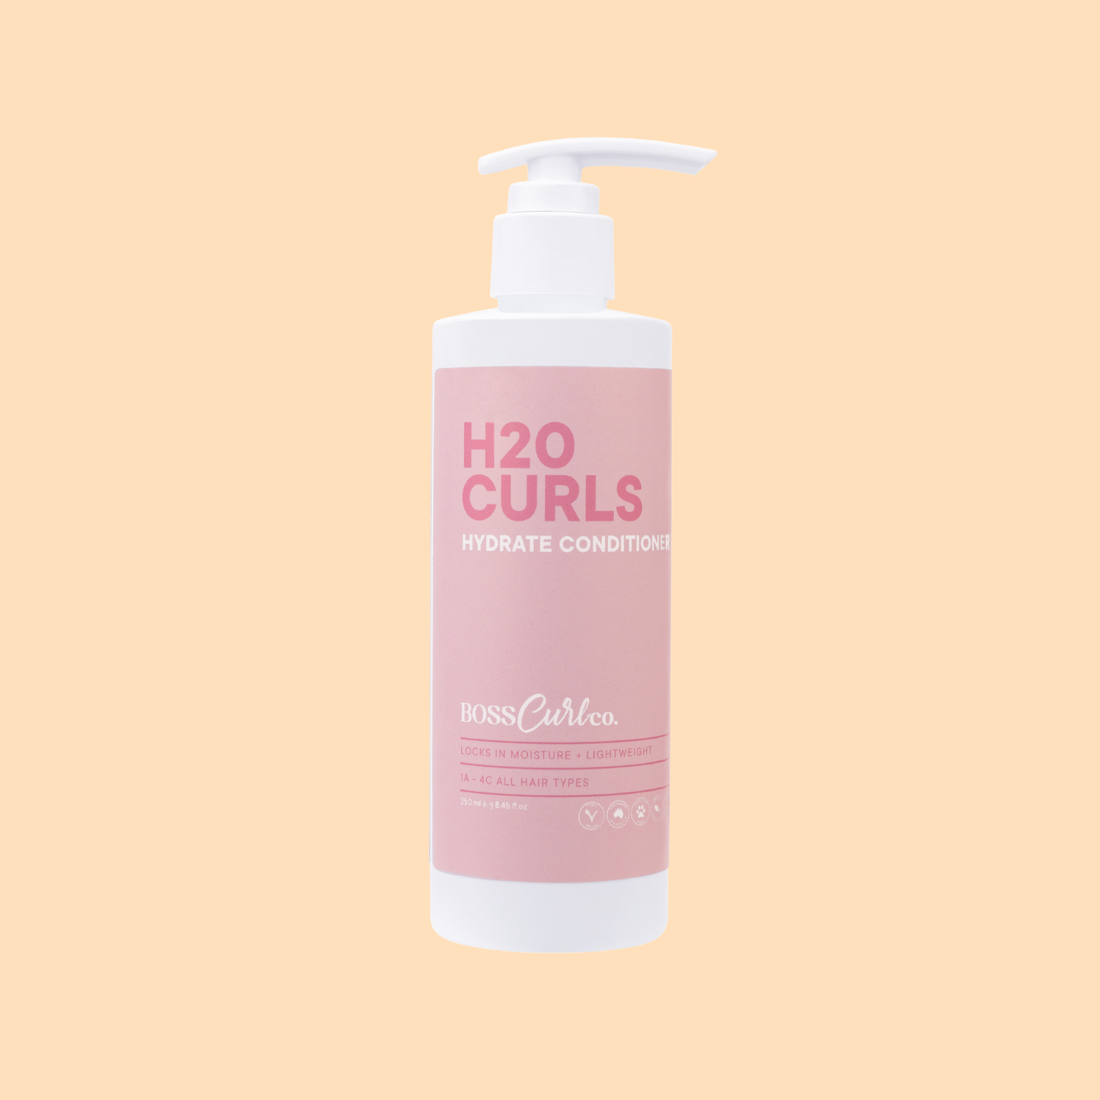 H20 Curls Hydrate Conditioner